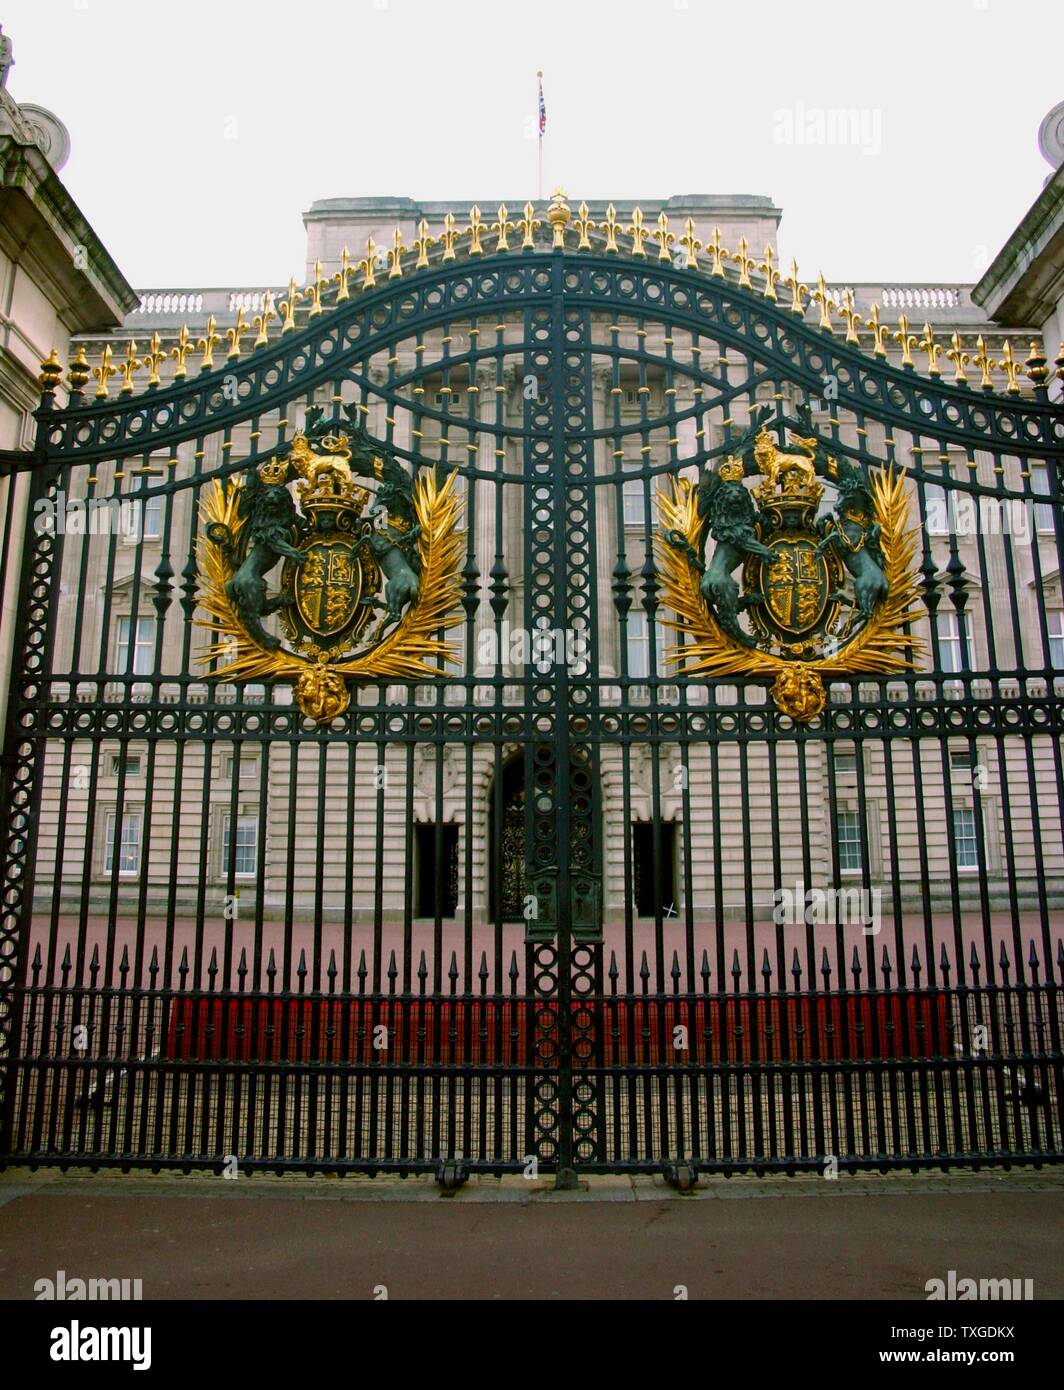 Exterior and gate of Buckingham Palace, residence and principal workplace of the monarchy of the United Kingdom. Dated 2014 Stock Photo